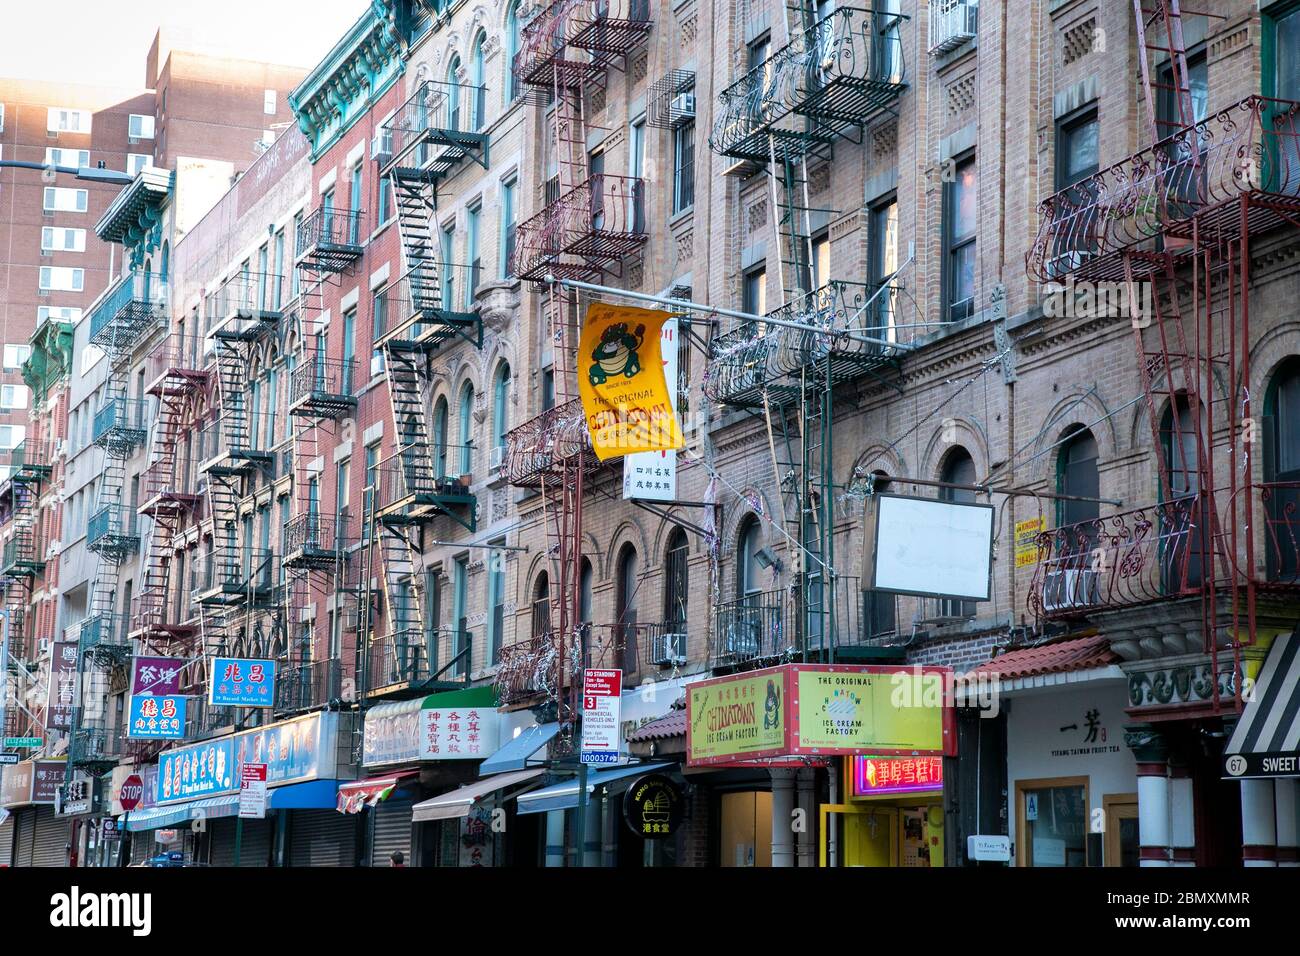 Old apartment buildings with fire escapes outside in Chinatown, NYC. Stock Photo